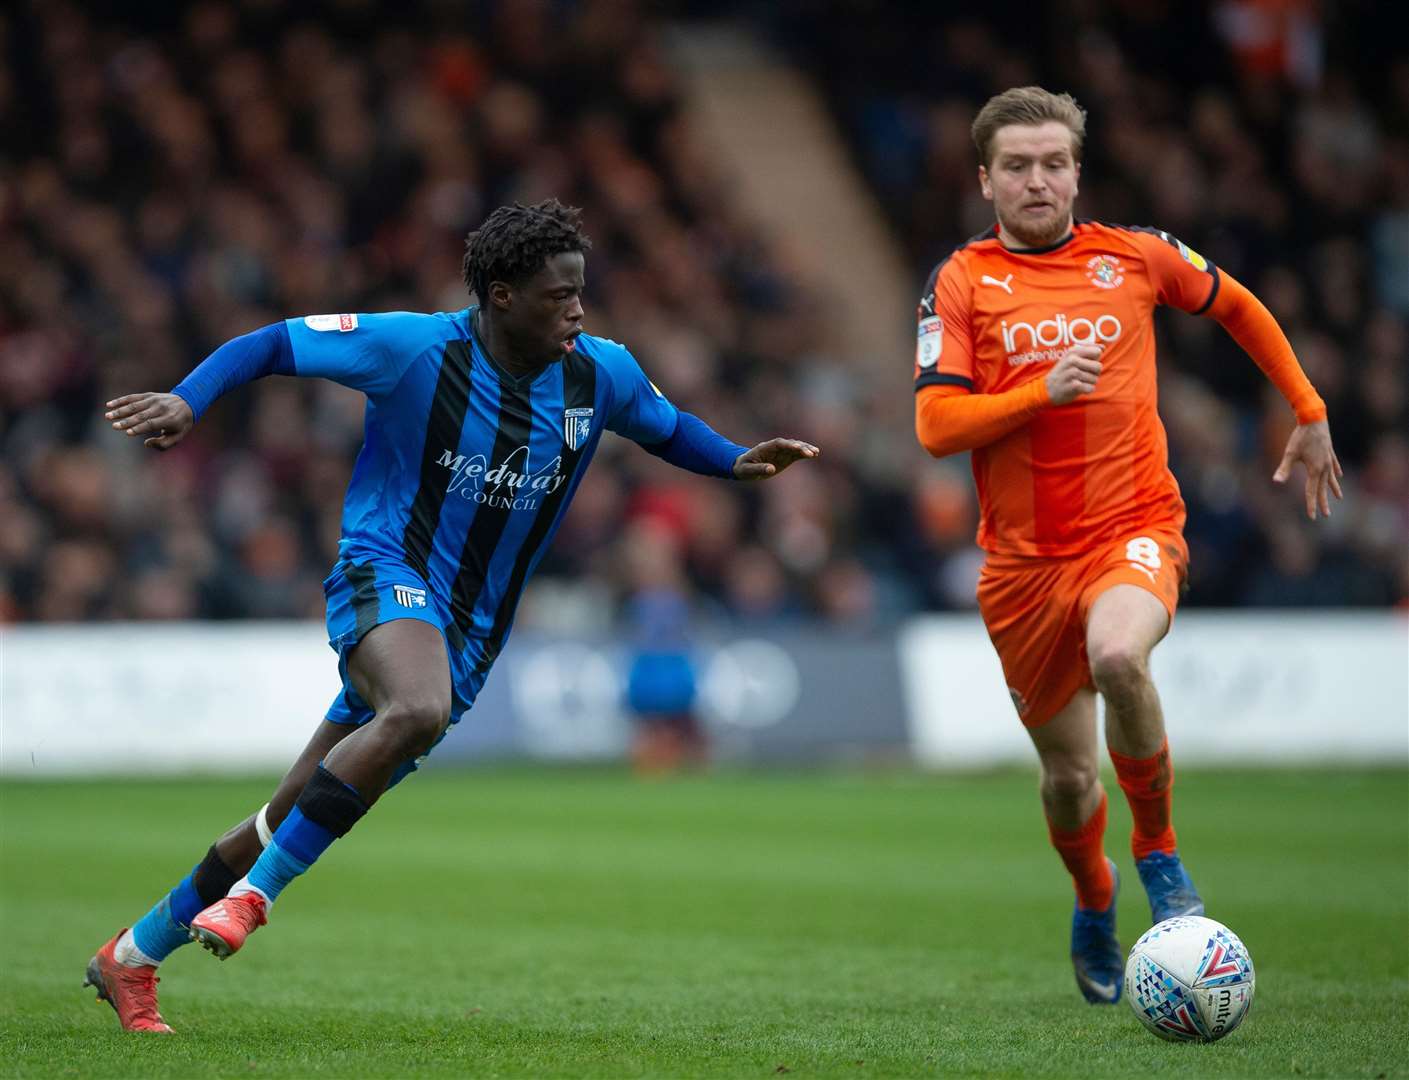 Leo Da Silva Lopes gets to the ball before Luton's Luke Berry Picture: Ady Kerry